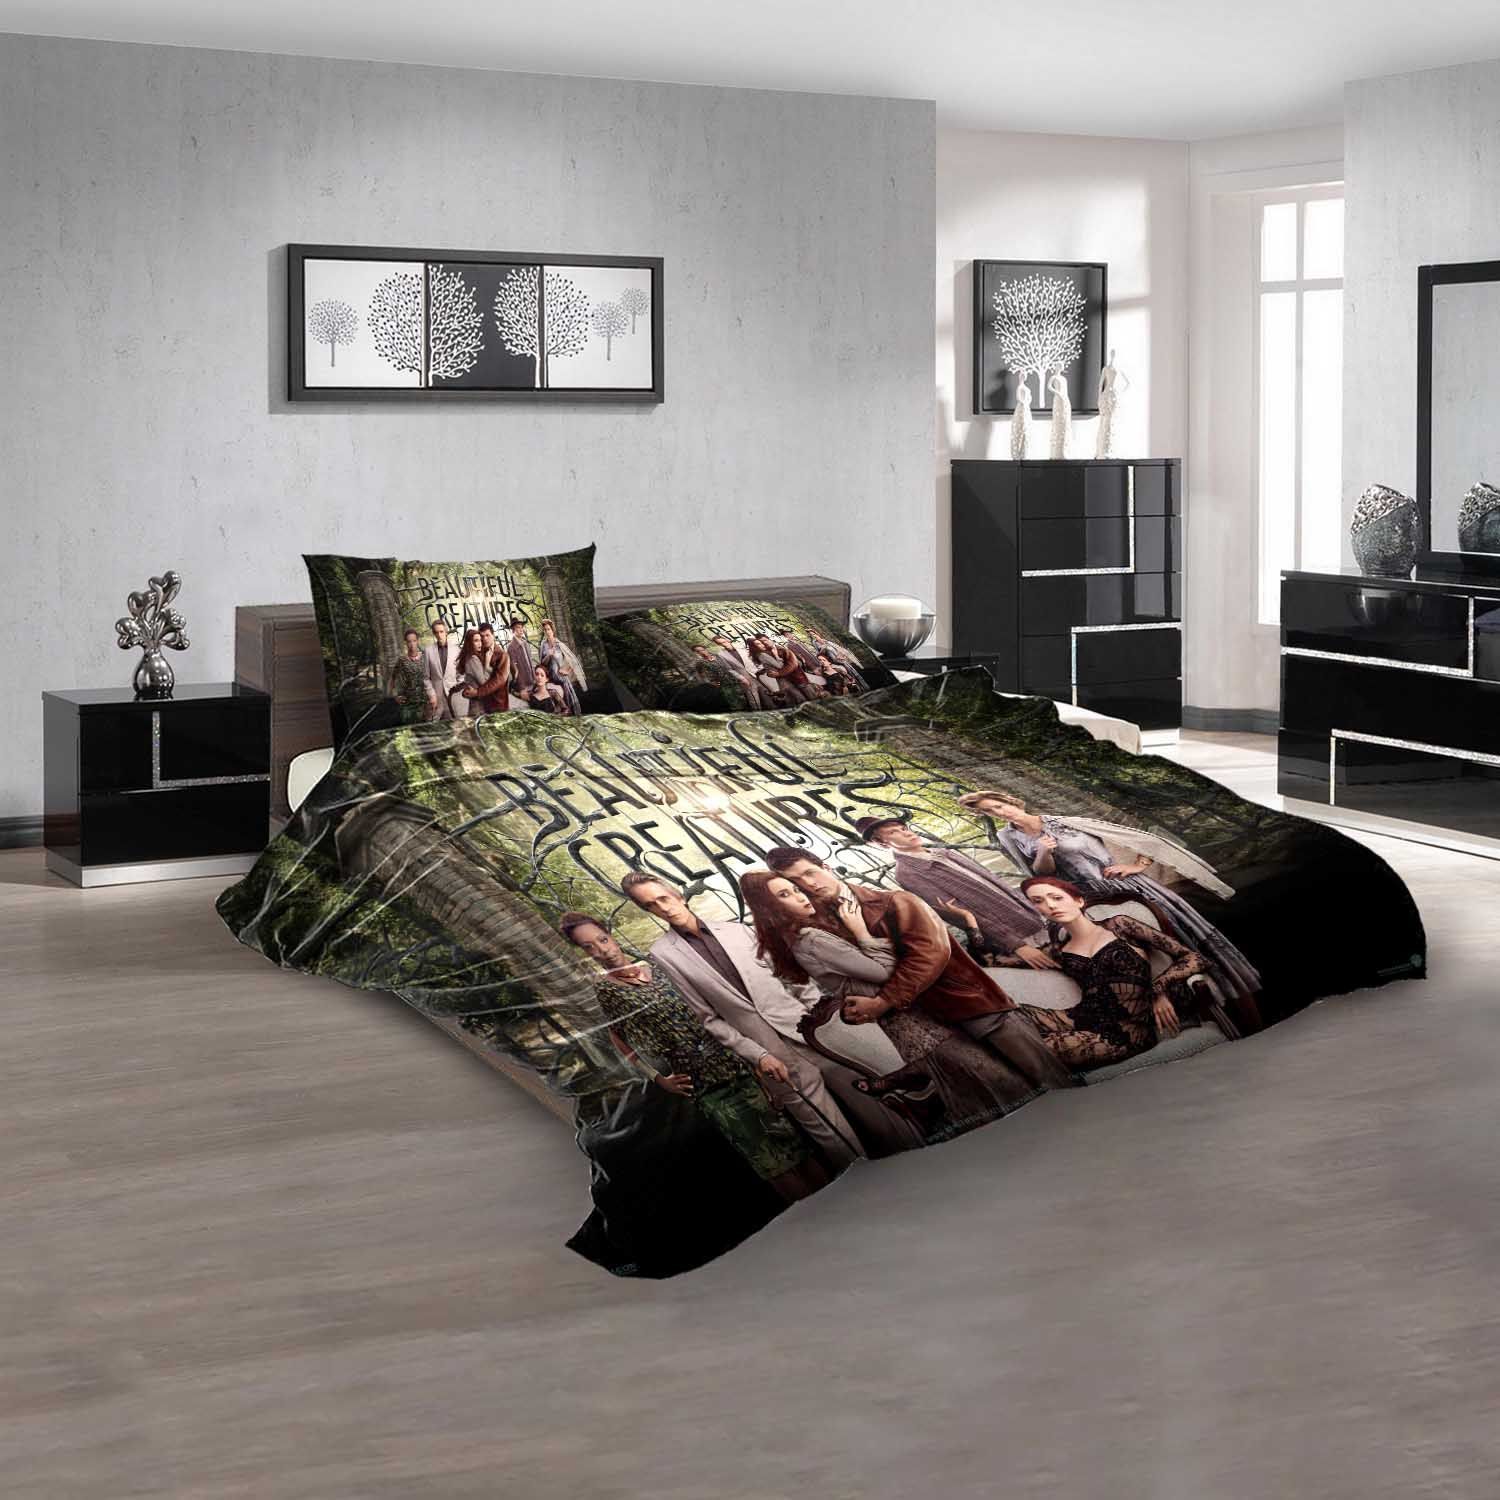 Movie Beautiful Creatures N Bedding Sets